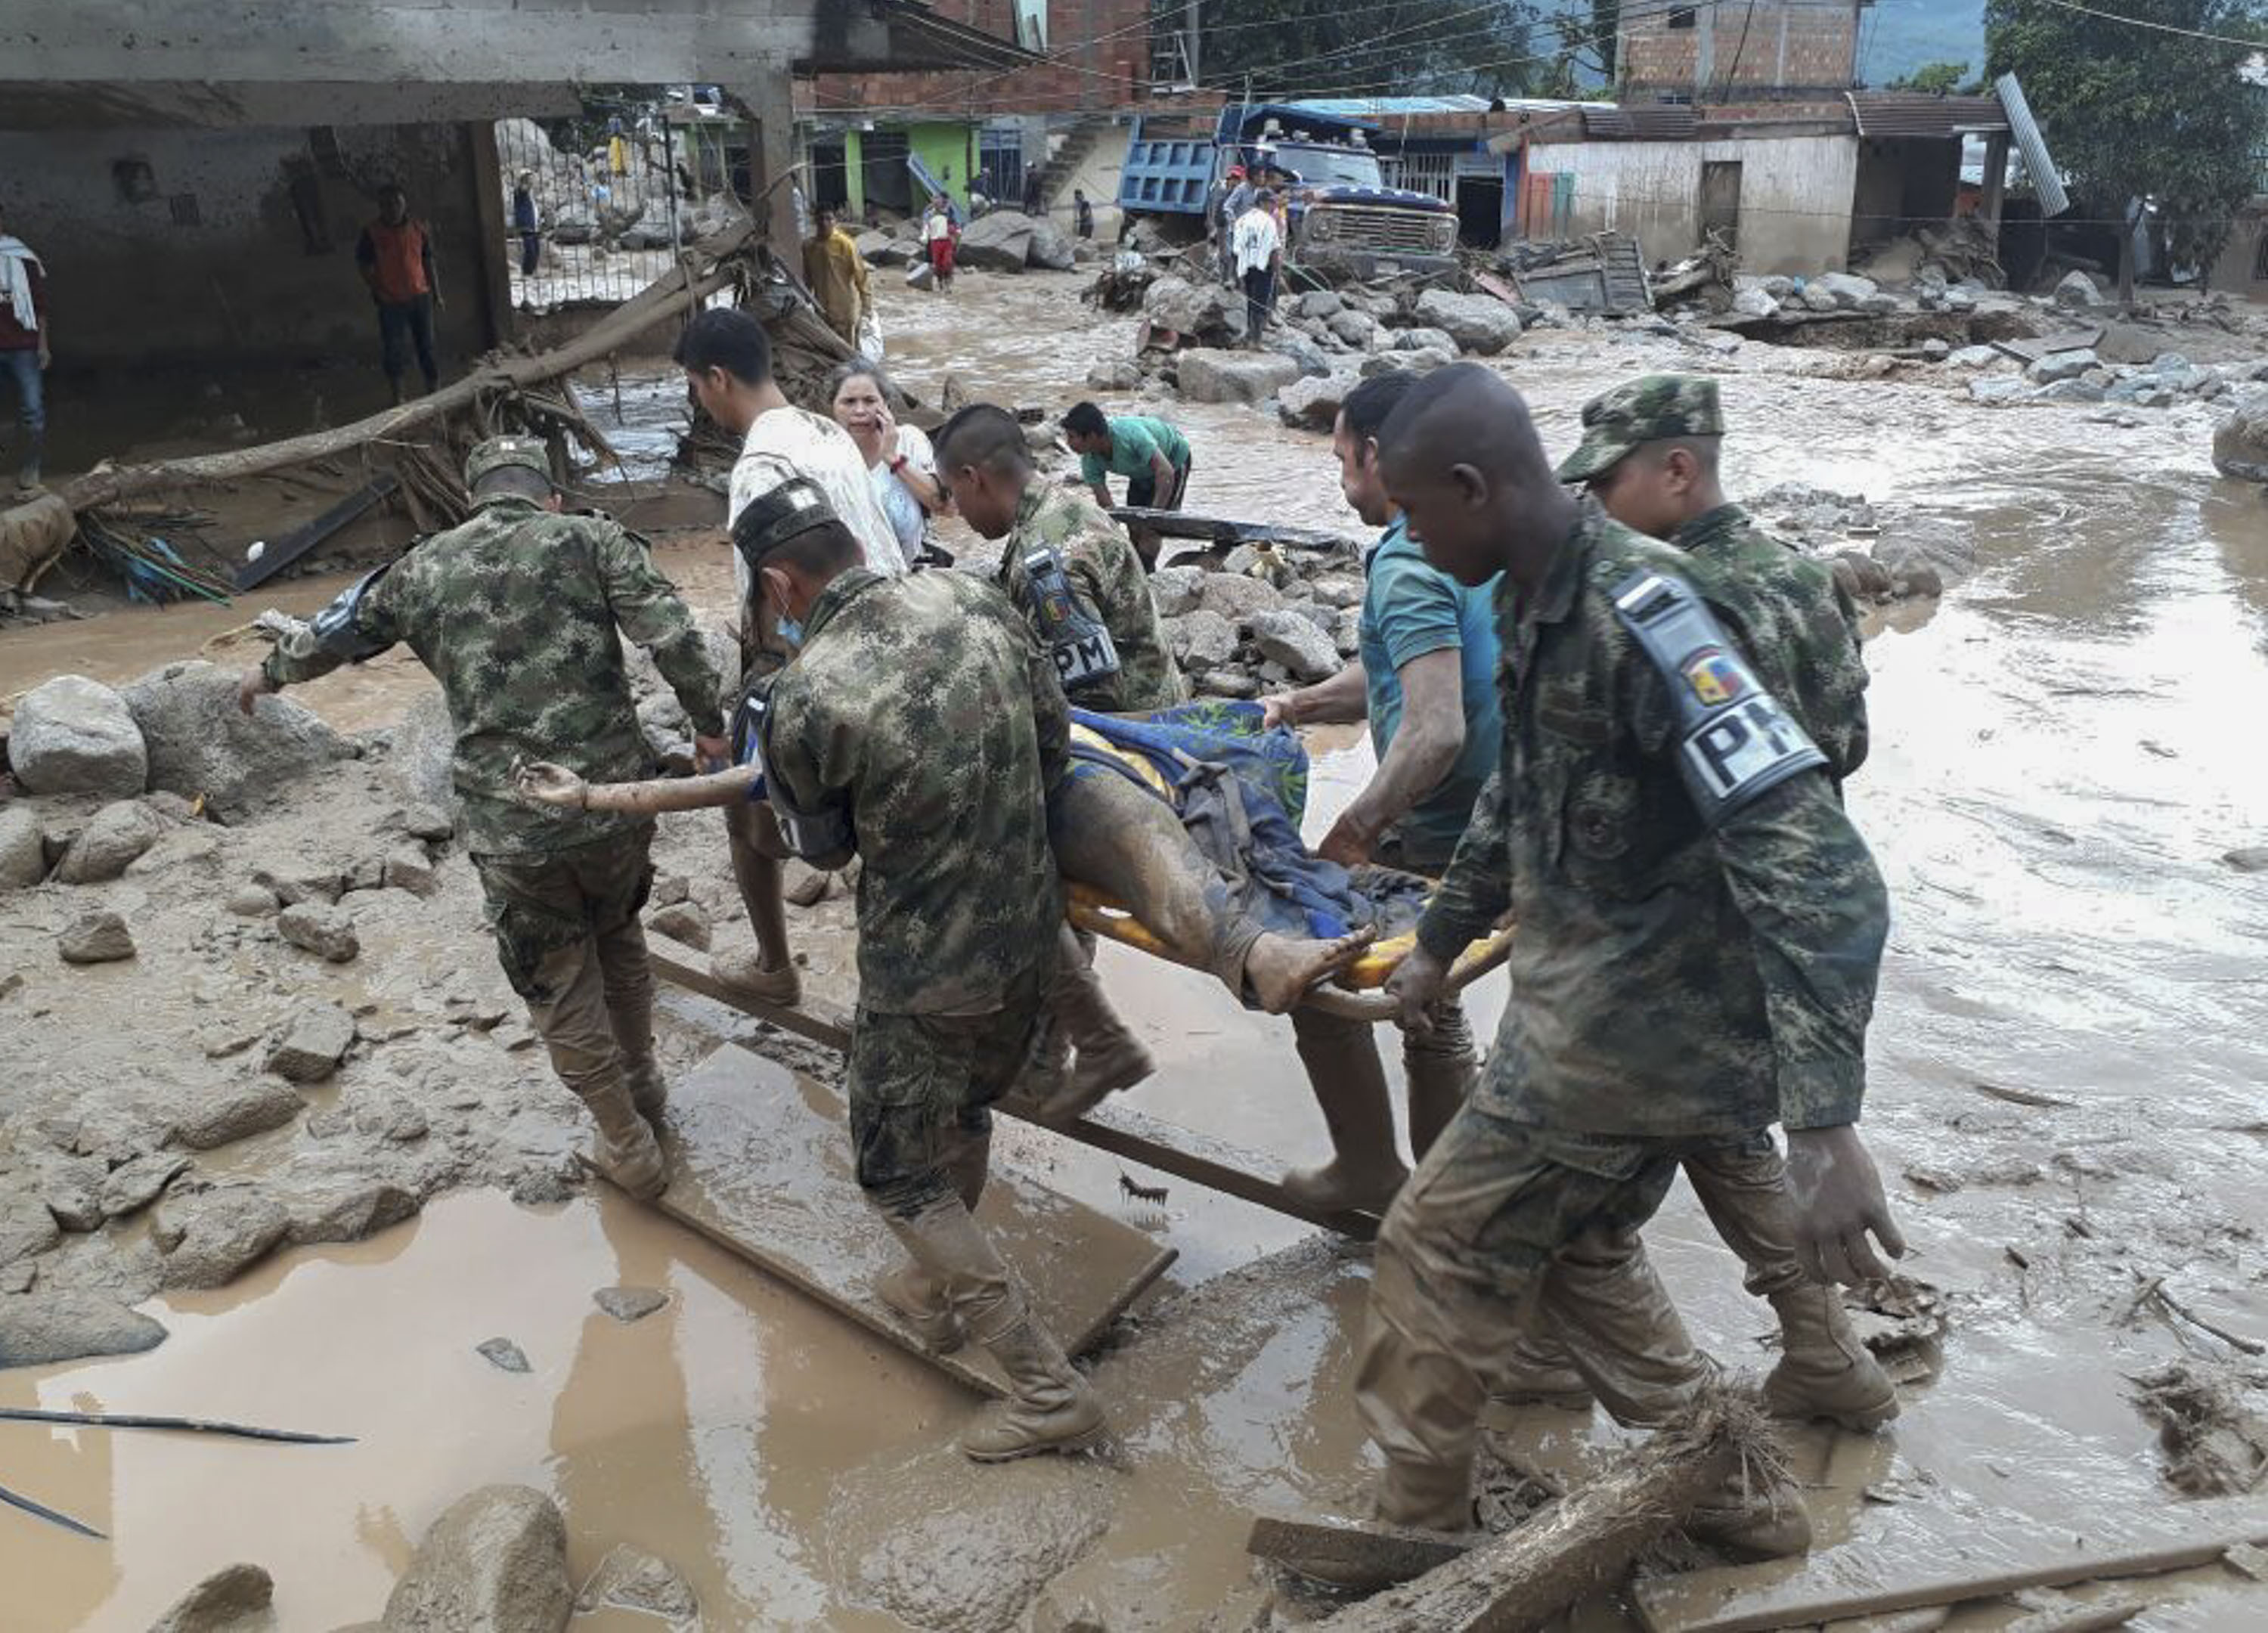 TOPSHOT - Handout picture released by the Colombian Army press office showing soldiers carrying a corpse following mudslides caused by heavy rains, in Mocoa, Putumayo department, on April 1, 2017. Mudslides in southern Colombia -caused by the rise of the Mocoa River and three tributaries- have claimed at least 16 lives and injured some 65 people following recent torrential rains, the authorities said. / AFP PHOTO / EJERCITO DE COLOMBIA / HO / RESTRICTED TO EDITORIAL USE - MANDATORY CREDIT AFP PHOTO / EJERCITO DE COLOMBIA - NO MARKETING - NO ADVERTISING CAMPAIGNS - DISTRIBUTED AS A SERVICE TO CLIENTS / TT / kod 444